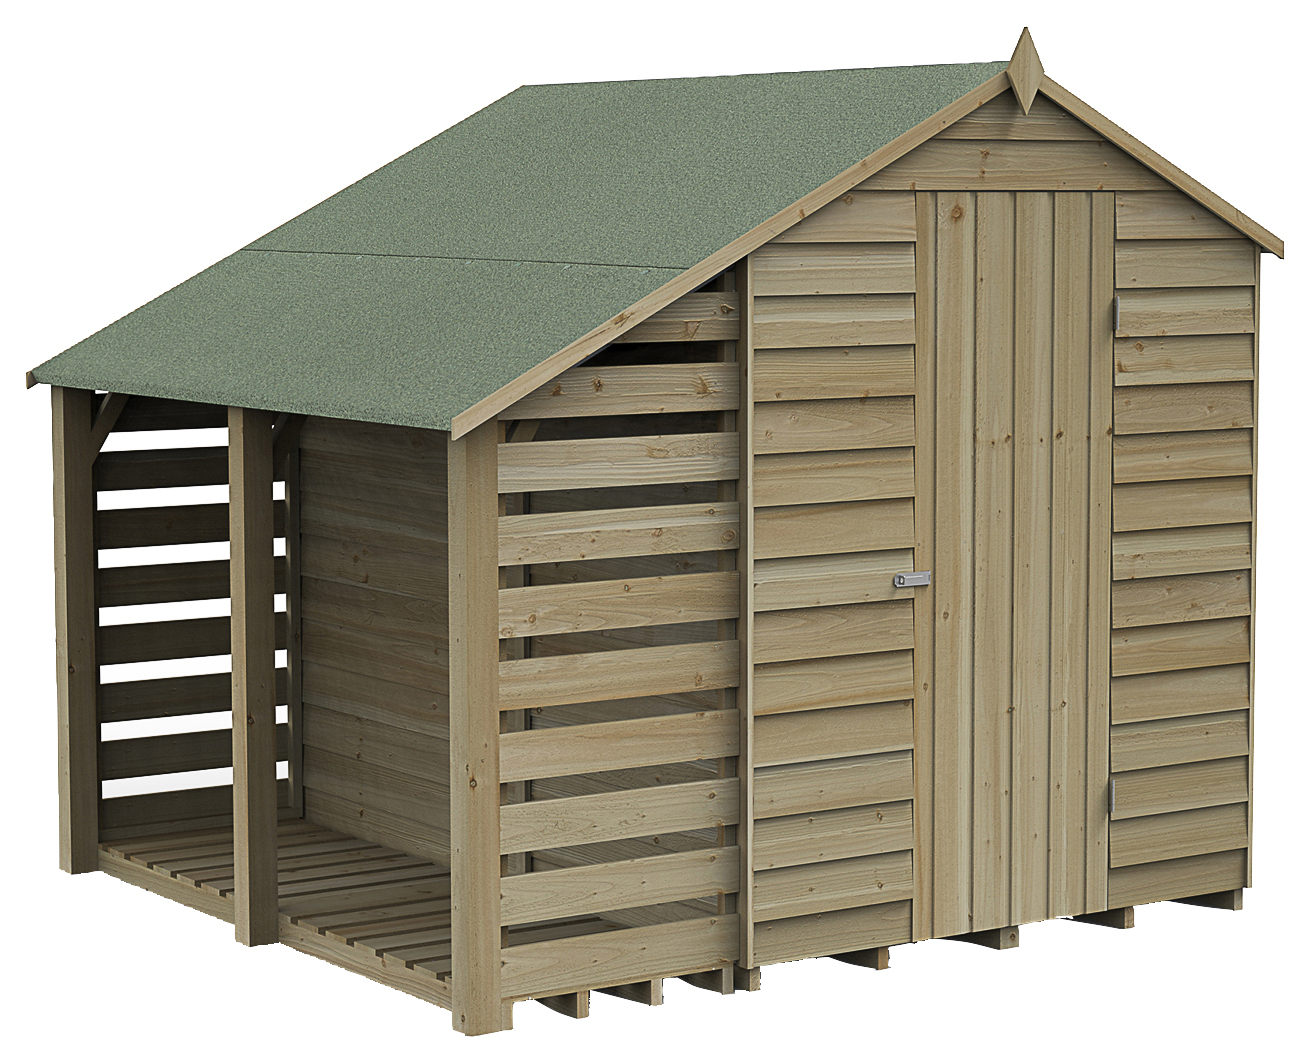 Forest Garden 7 x 5ft 4Life Apex Overlap Pressure Treated Windowless Shed with Lean-To